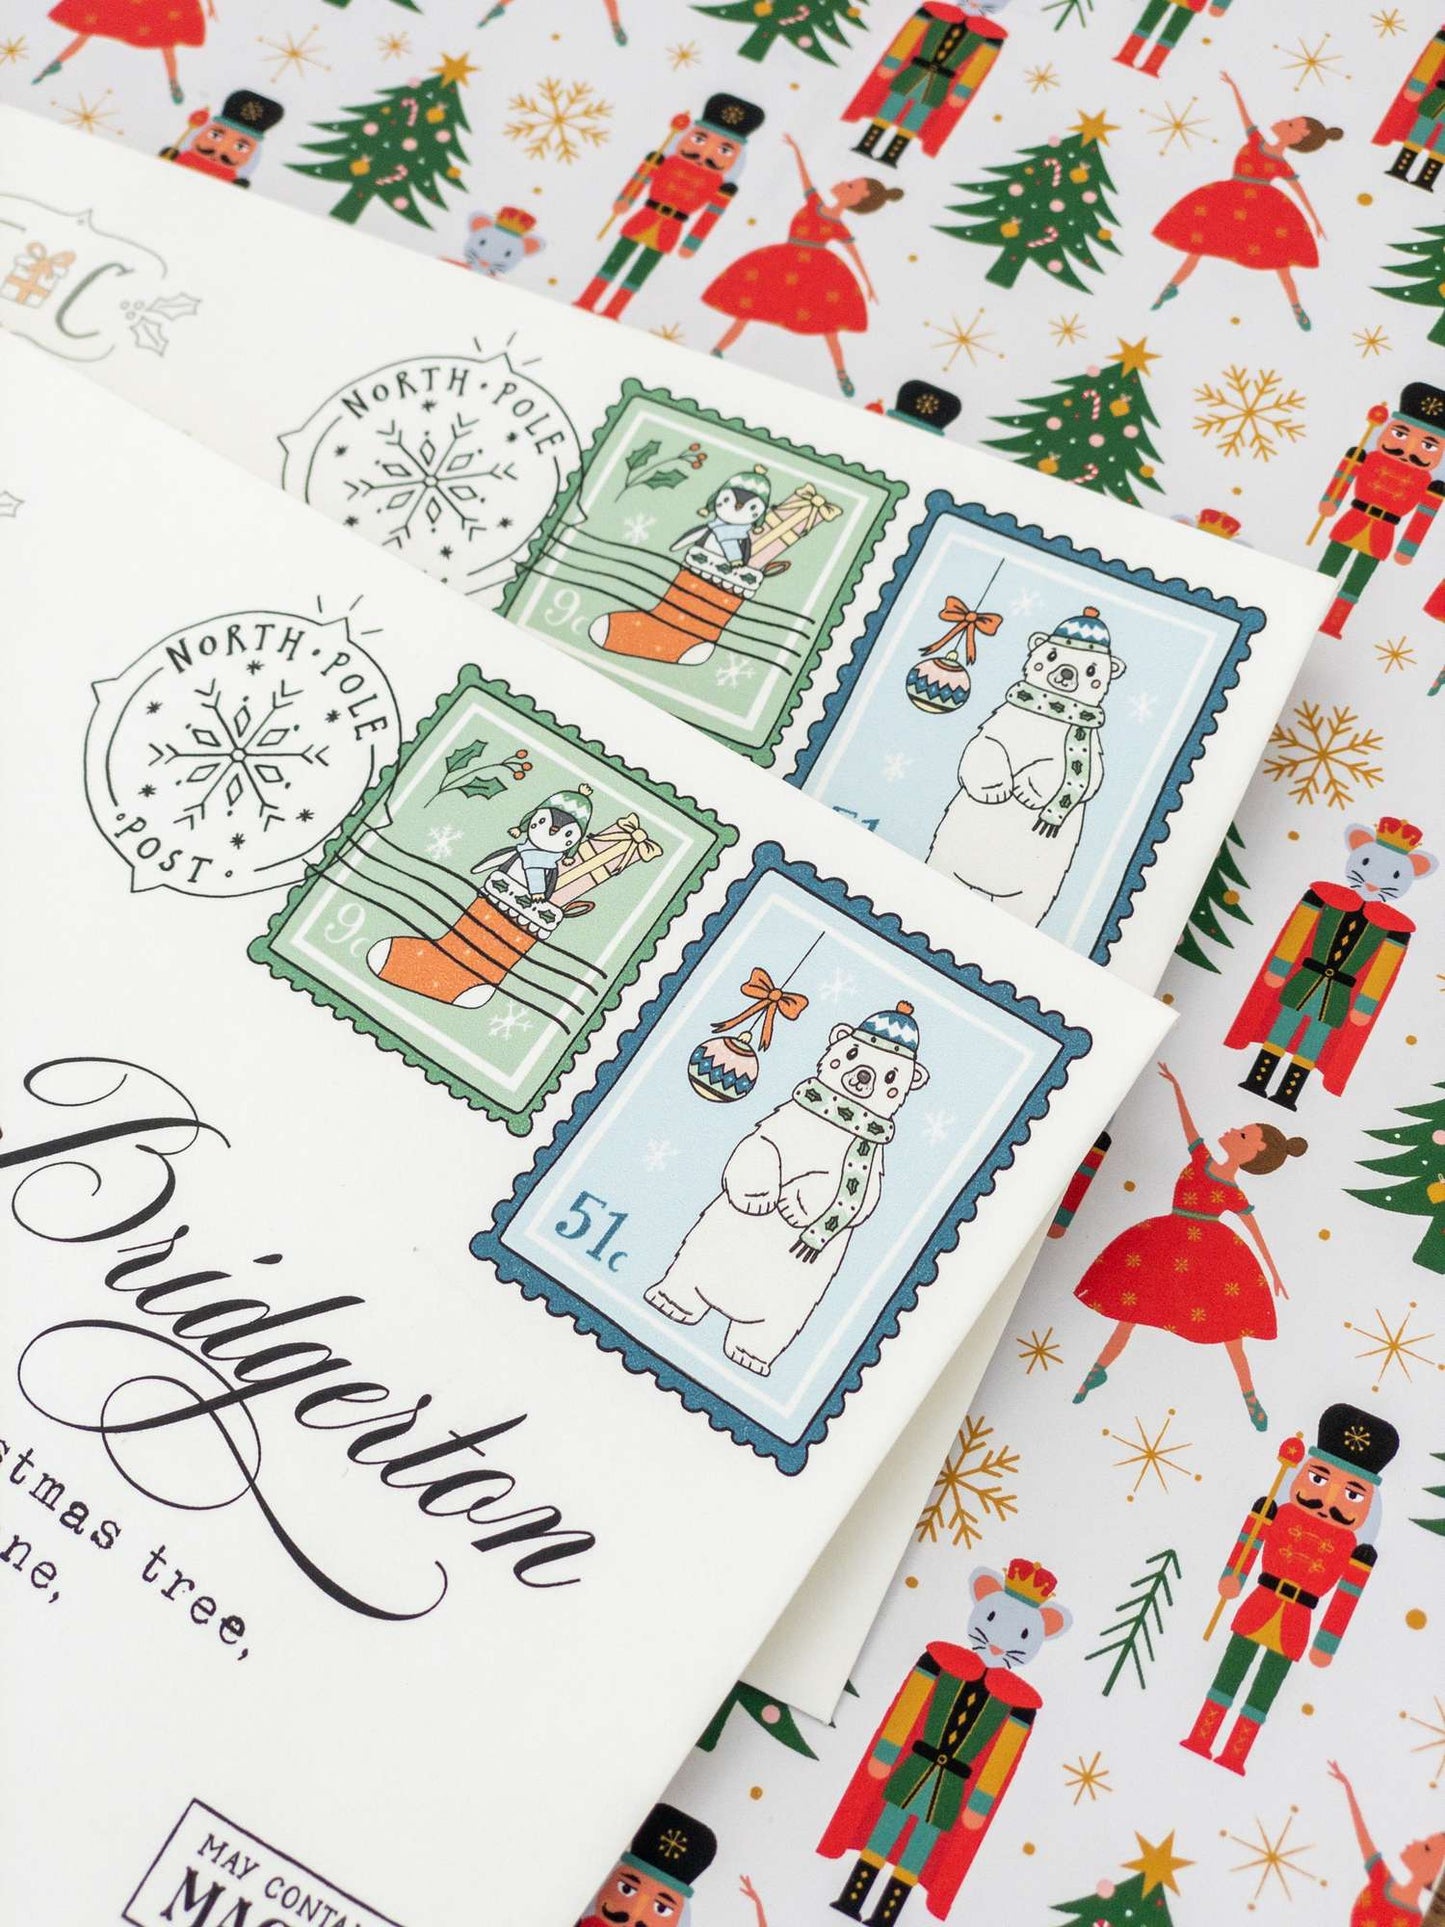 The Sibling Classic Santa Claus Letters